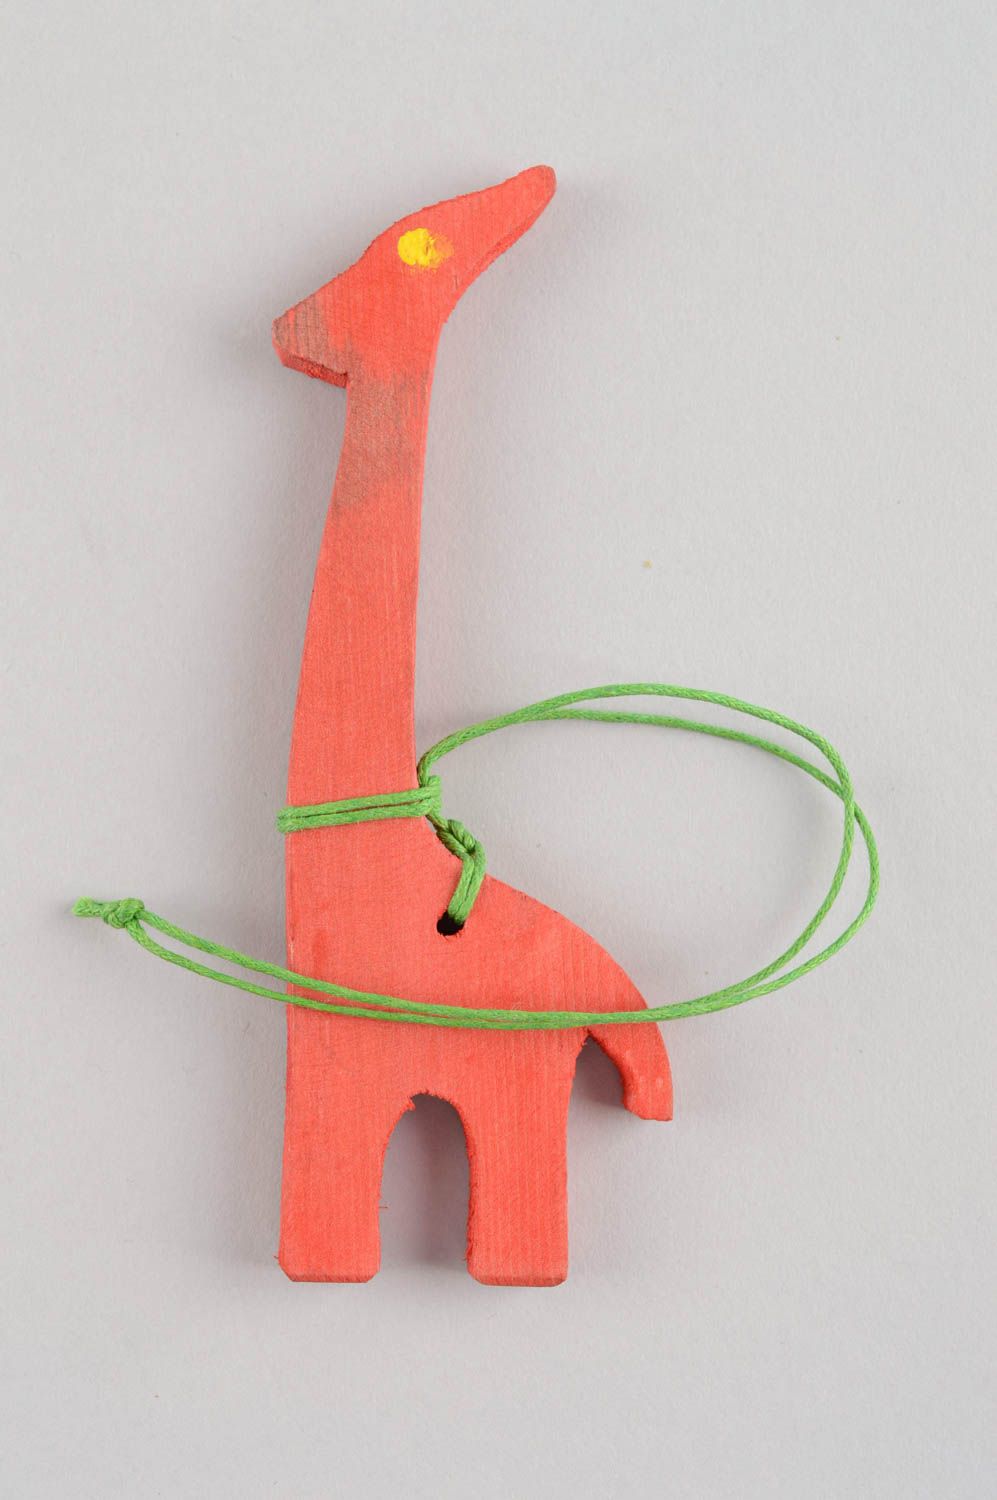 Handmade decorative wall hanging small wooden toy red giraffe for child's room photo 4